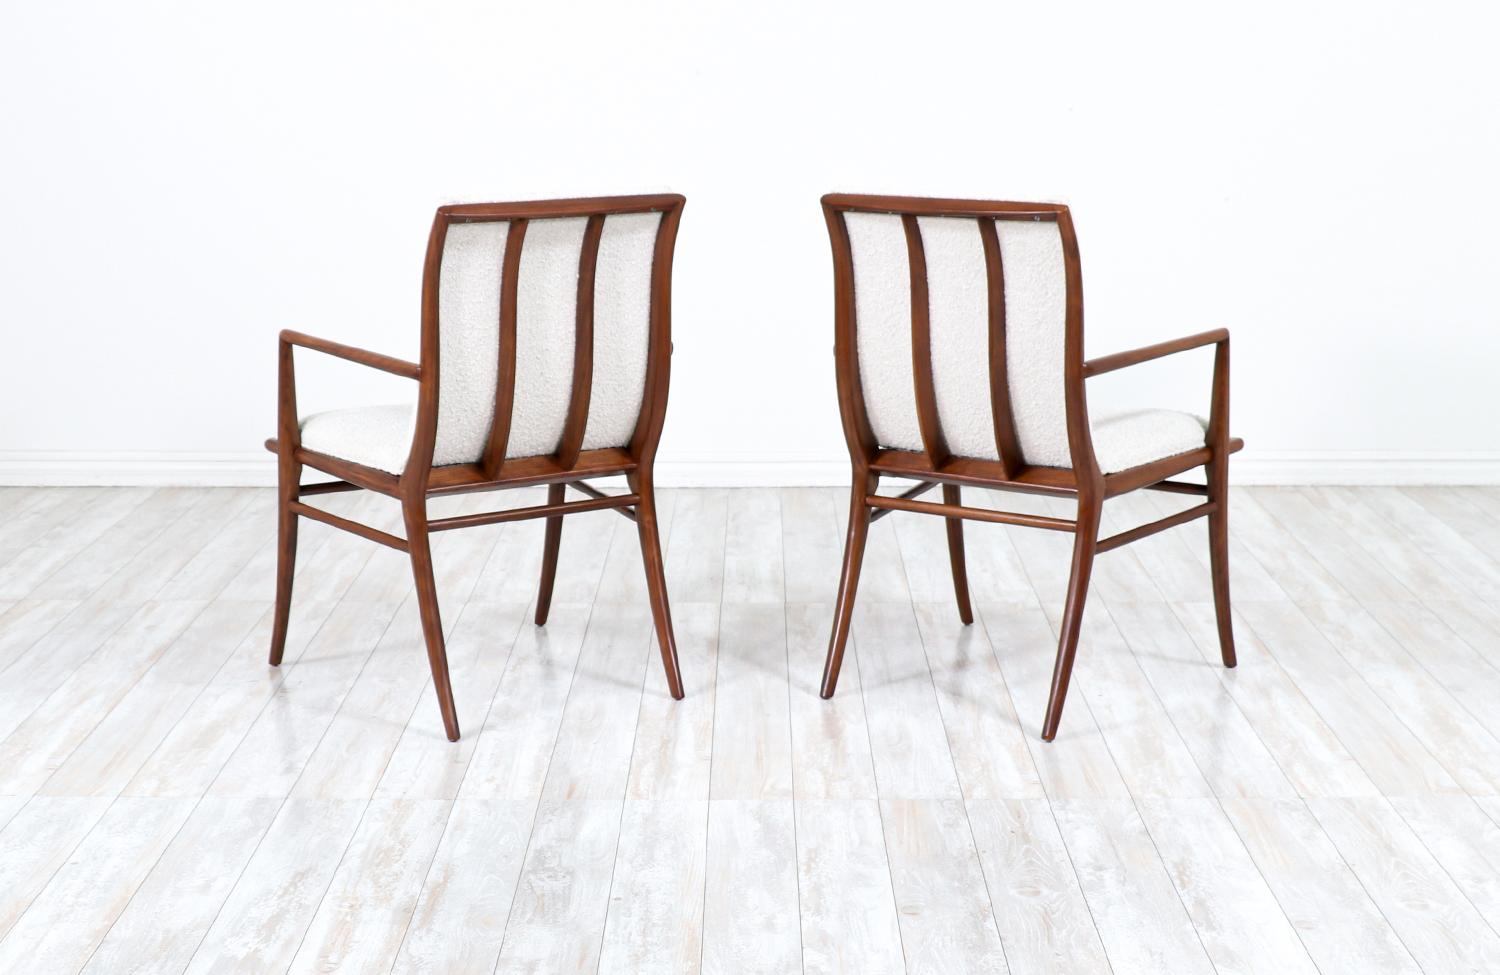 Mid-20th Century T.H. Robsjohn-Gibbings Sculpted Saber Arm Chairs for Widdicomb